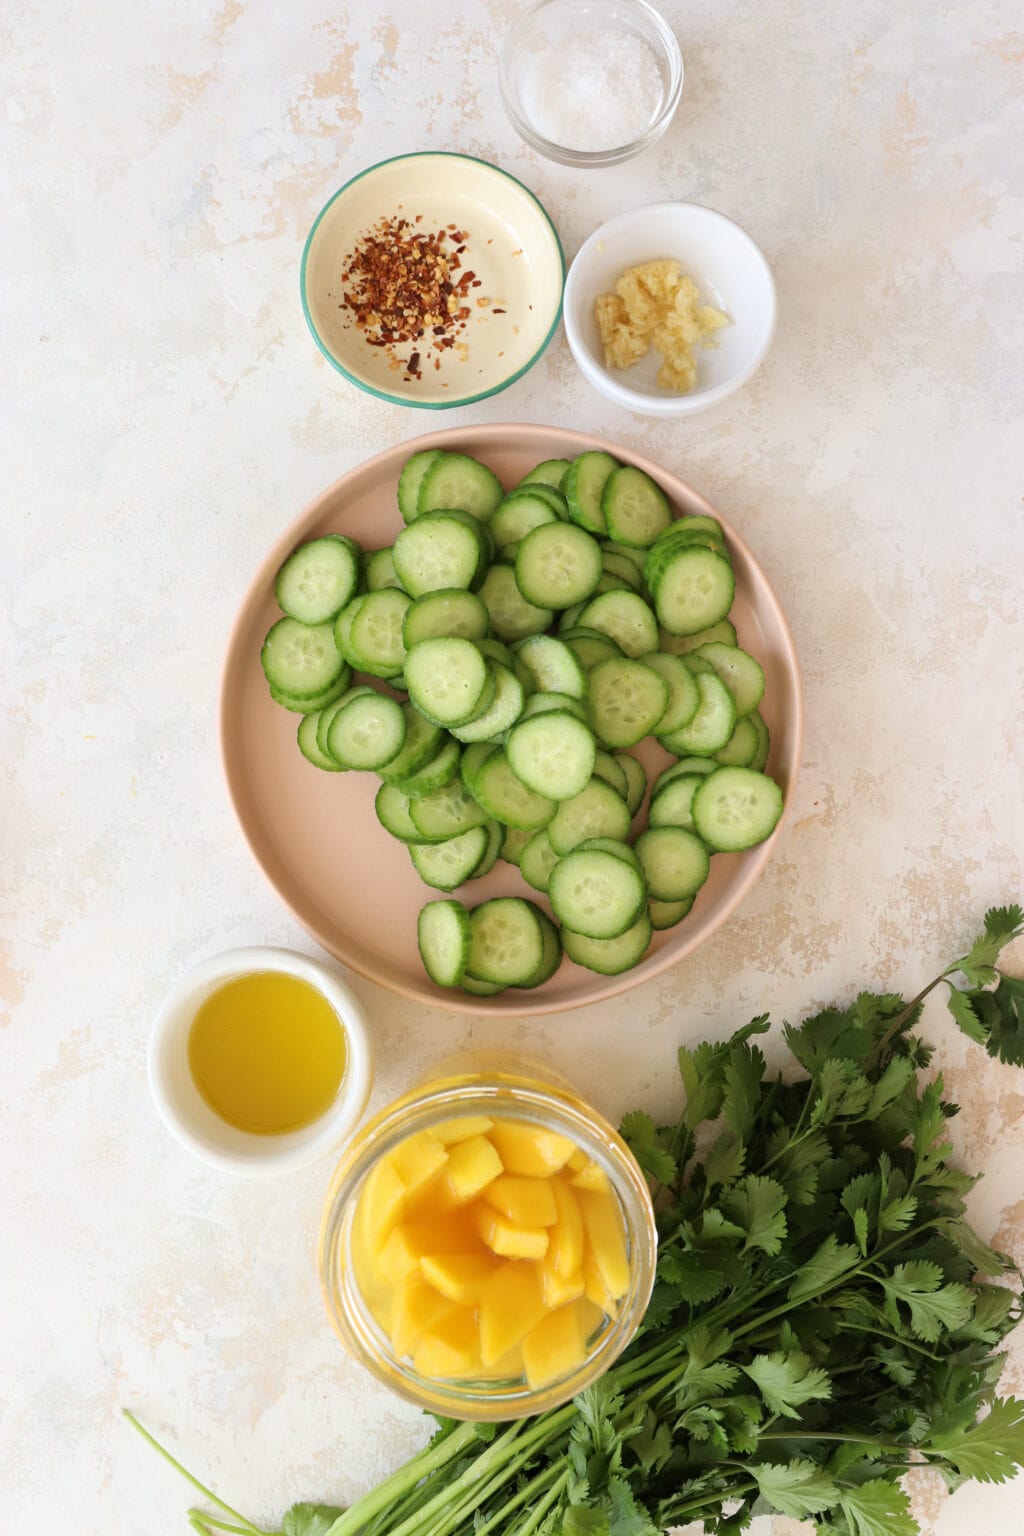 An overhead shot of the ingredients for the salad. At the top are two white bowls. One has red pepper flakes and the other has garlic. IN the middle there is a plate with sliced mini cucumber. At the bottom is a white bowl of olive oil, a jar of pickled mango, and a bunch of cilantro.